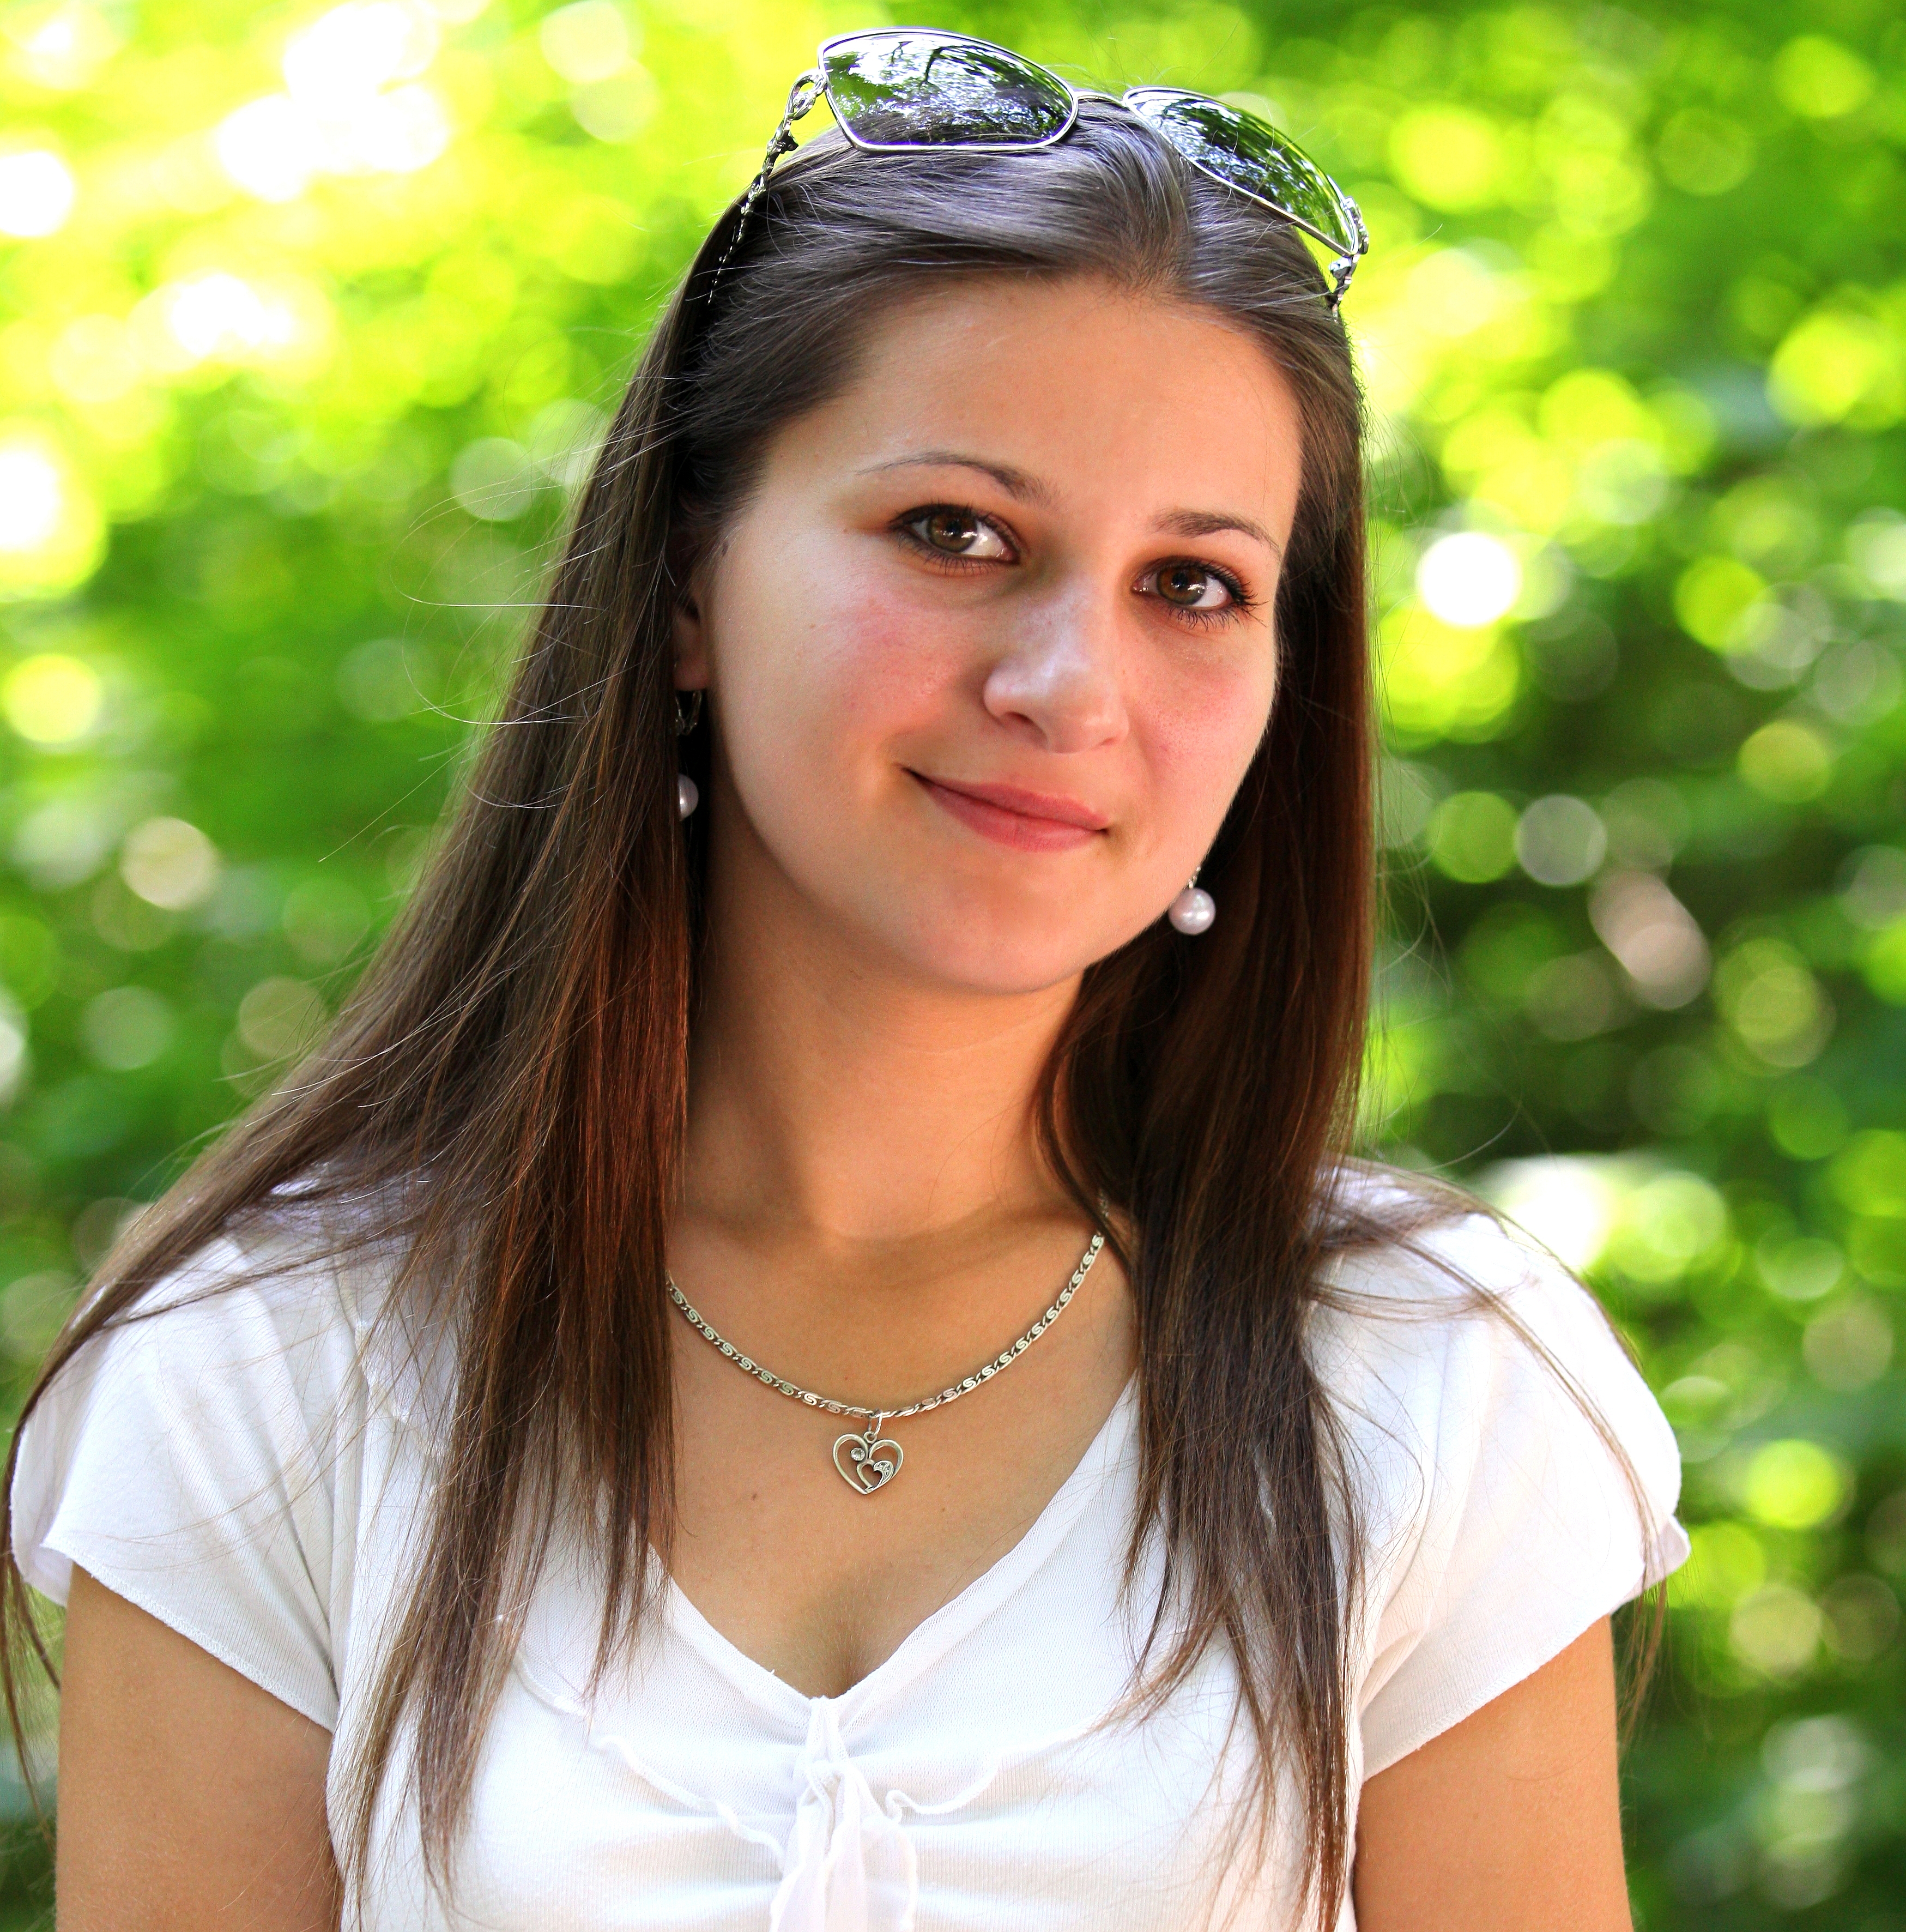 a marvelously beautiful Catholic girl photographed in July 2013, picture 7/22